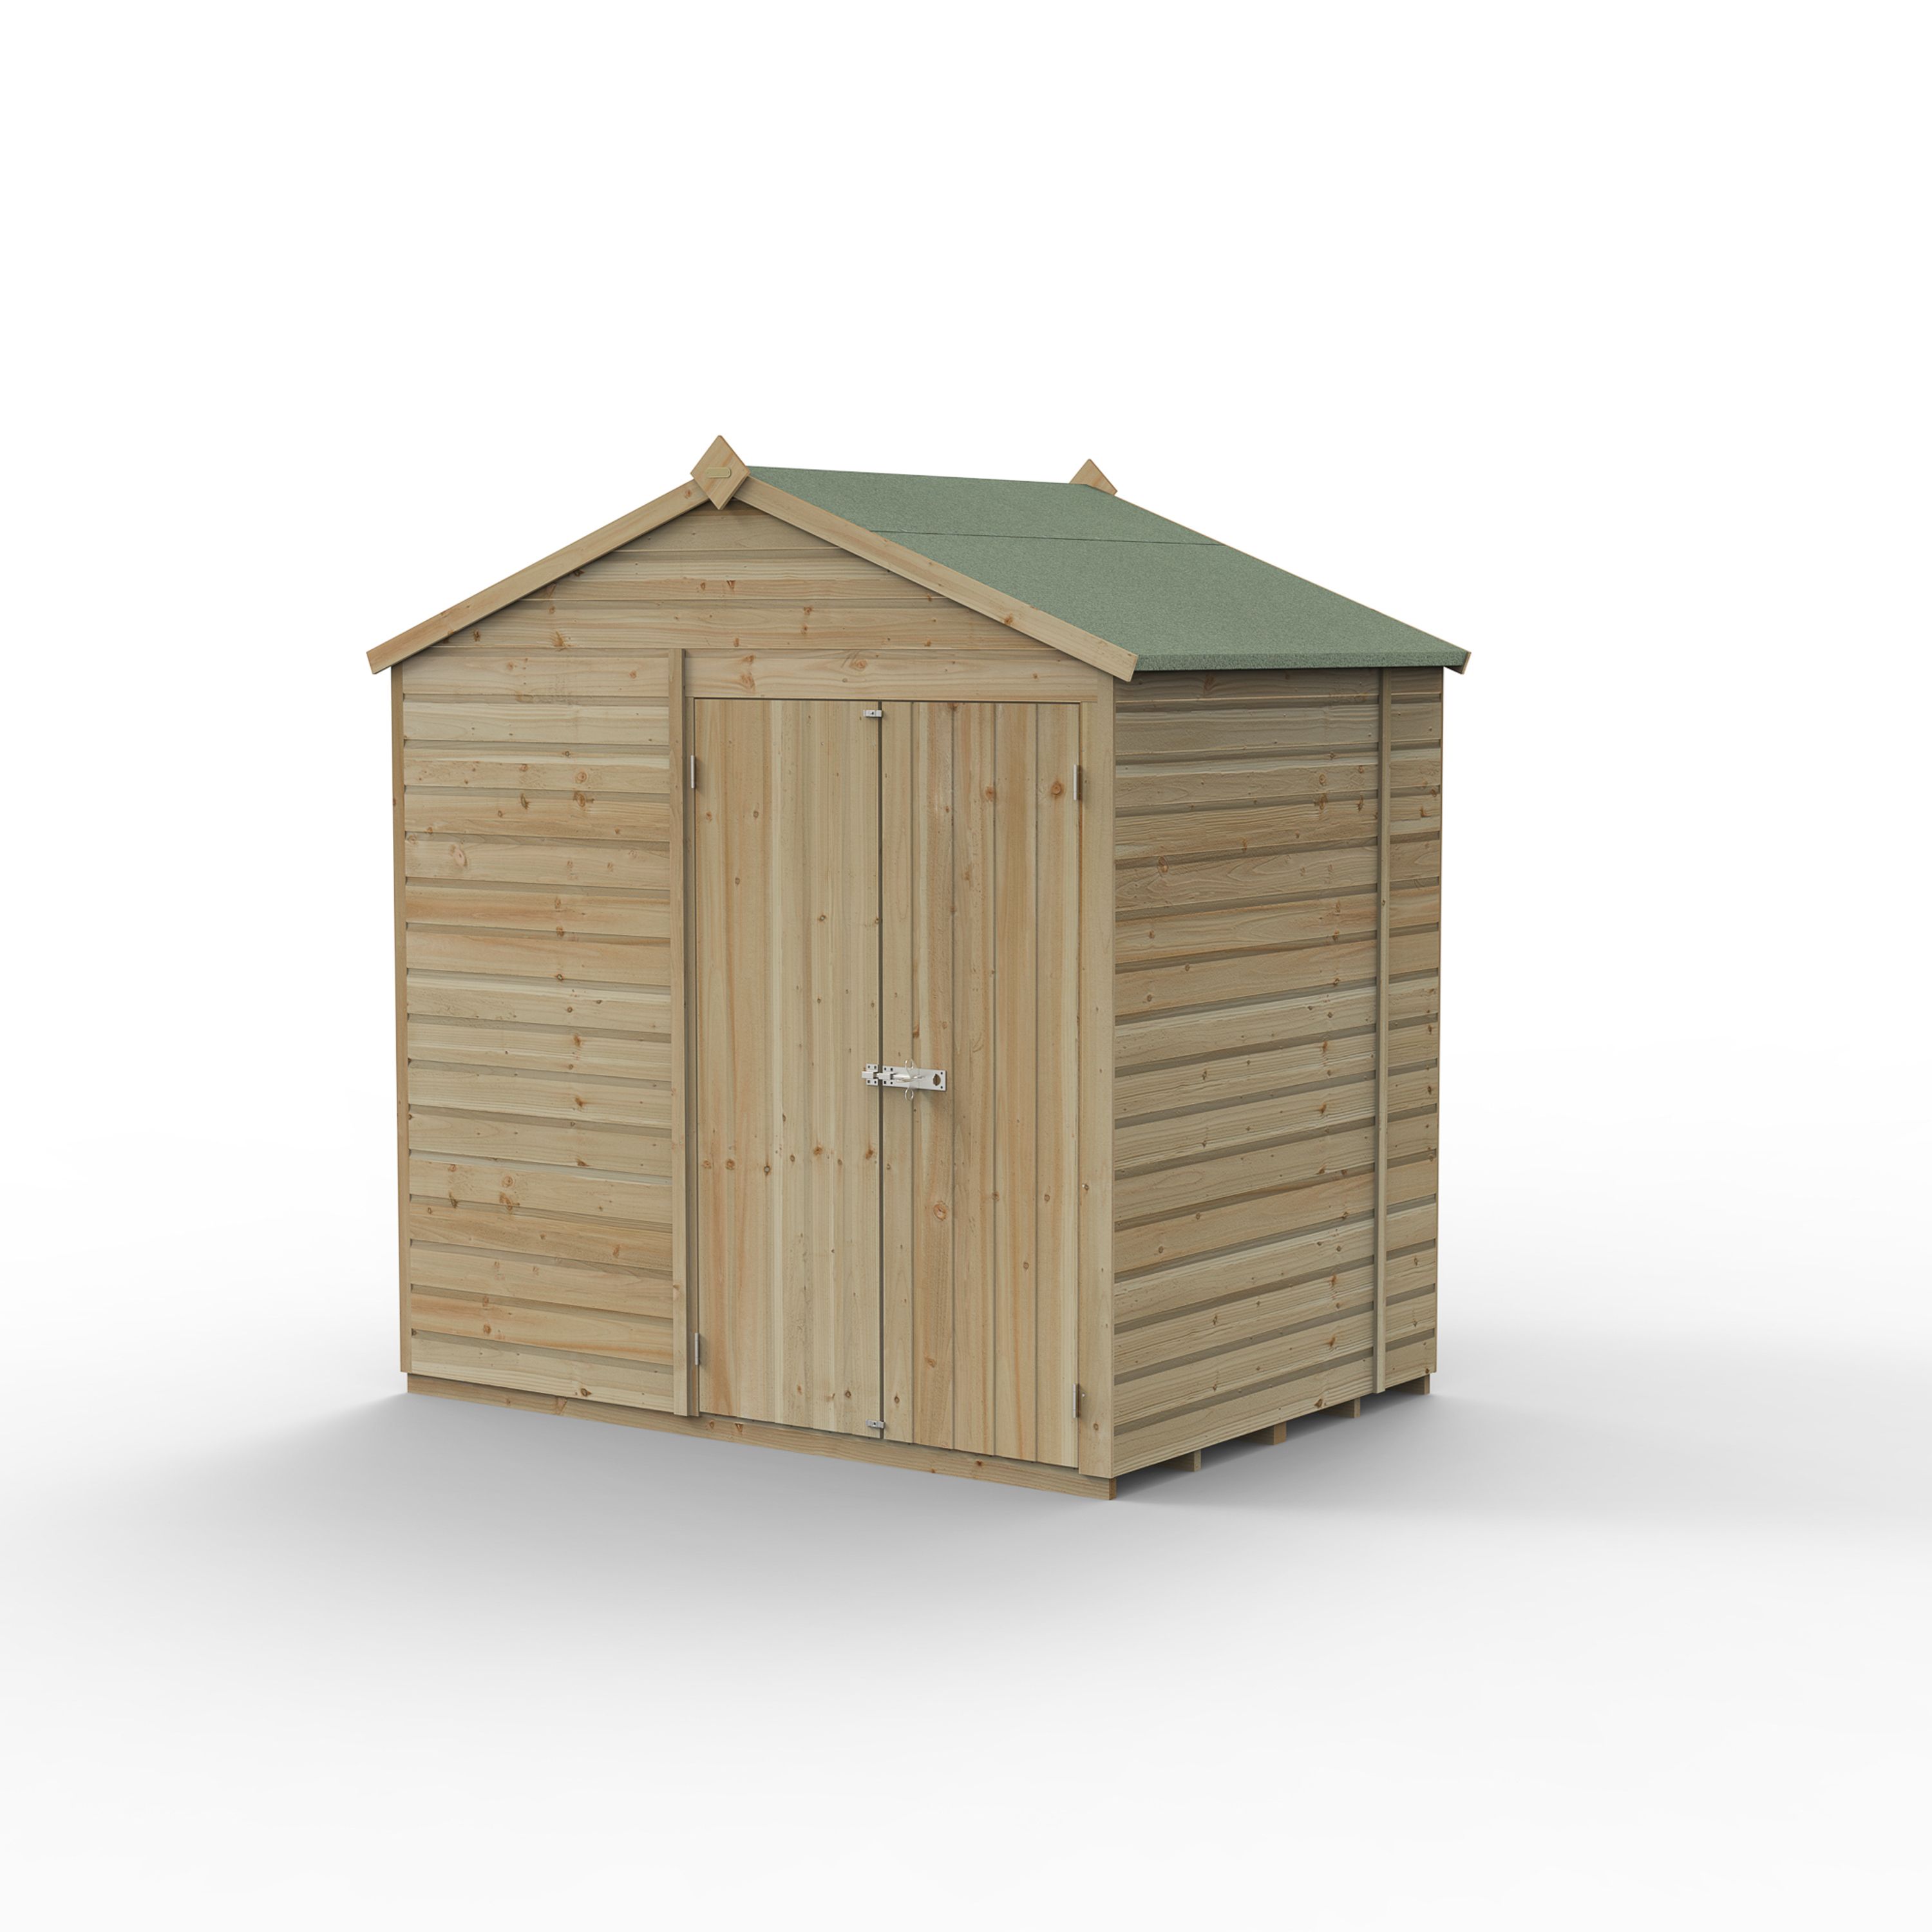 Forest Garden Beckwood 7x5 ft Apex Natural timber Wooden 2 door Shed with floor (Base included) - Assembly not required